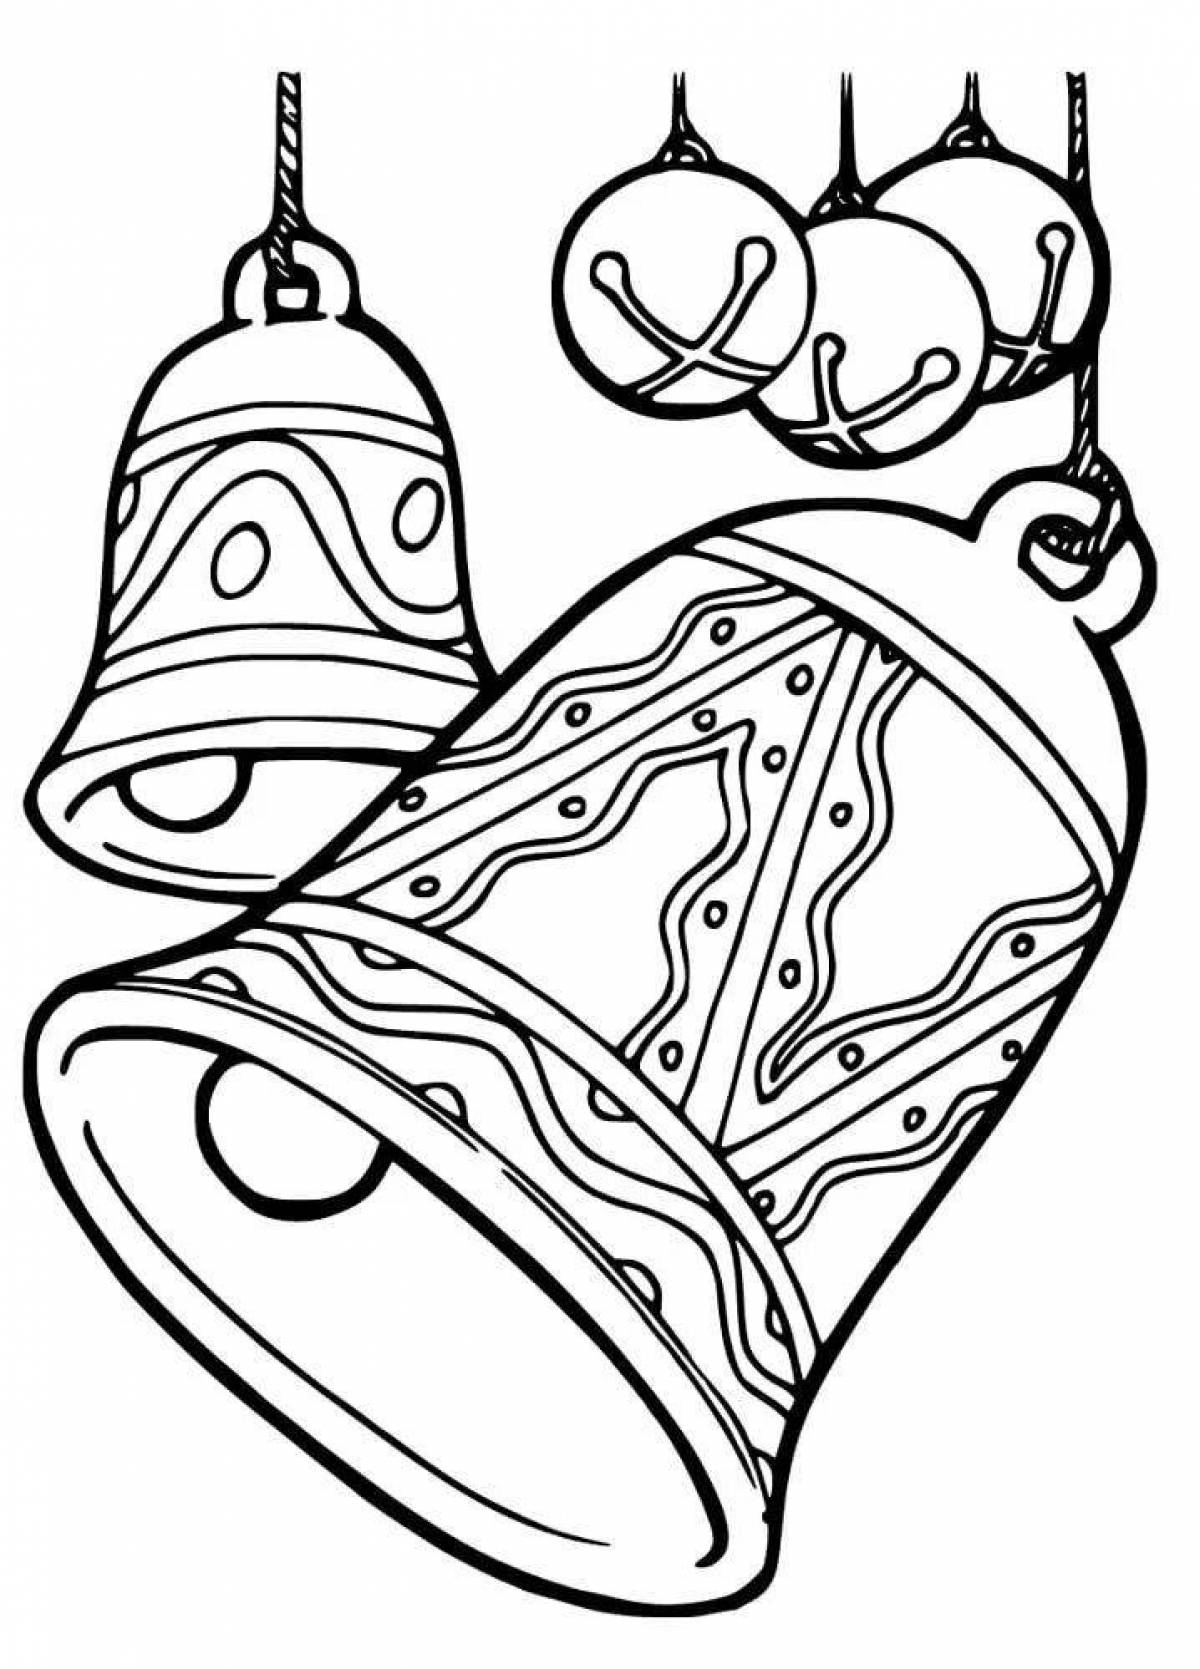 Coloring book shiny Christmas bell